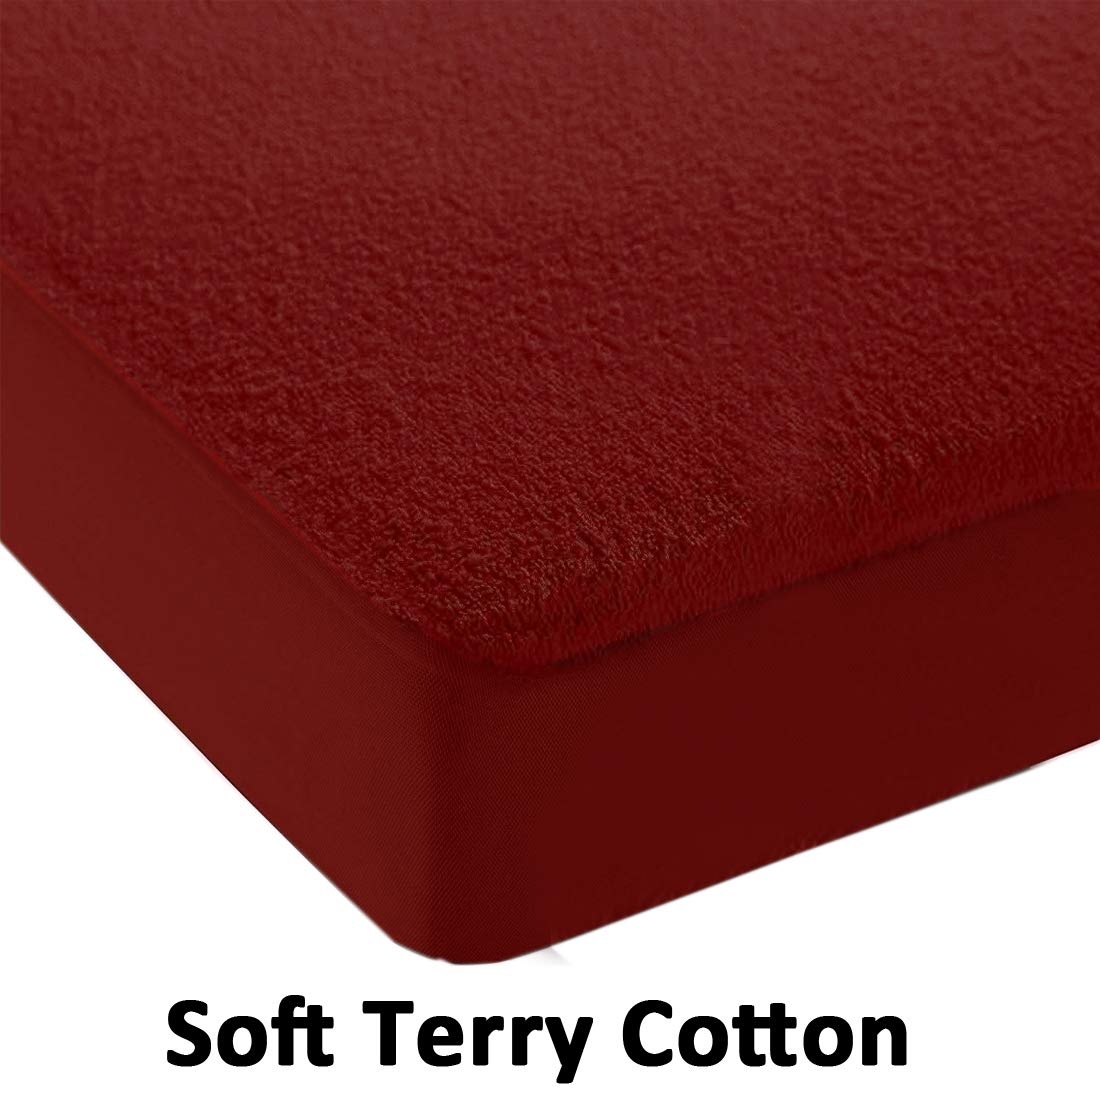 100% Waterproof Terry Cotton Fitted Mattress Protector for King Size Bed (78 x 72 Inch, Maroon) 3